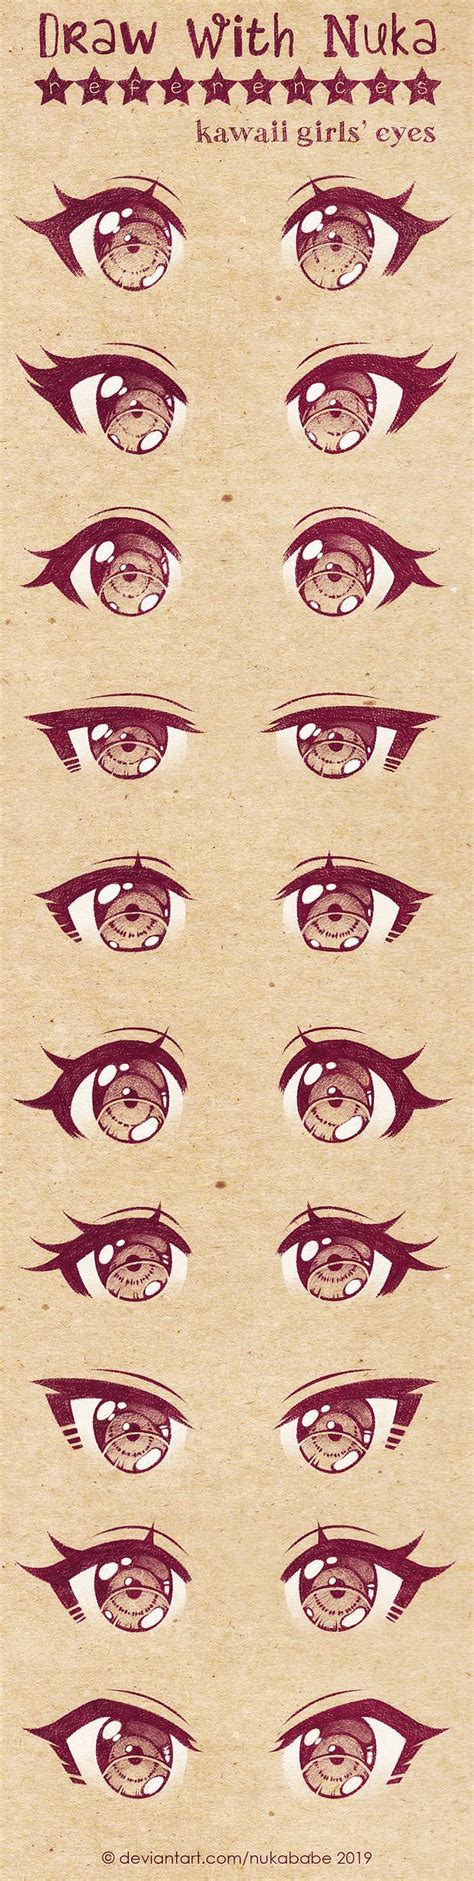 Anime Eyes Reference By Nukababe On Deviantart Anime Drawings